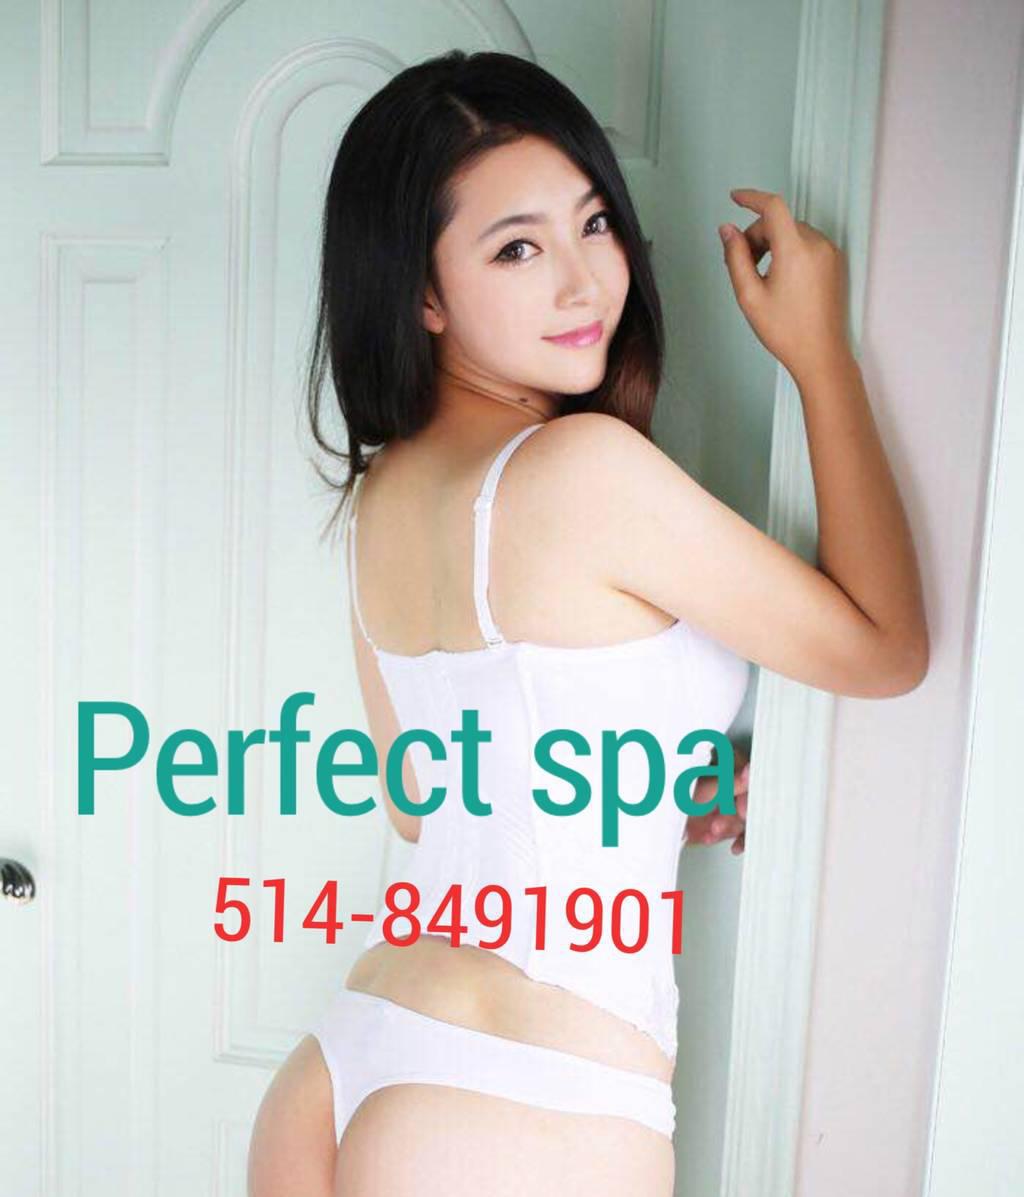 hh/100$ absolute truth all only perfect spa every day 6 girl